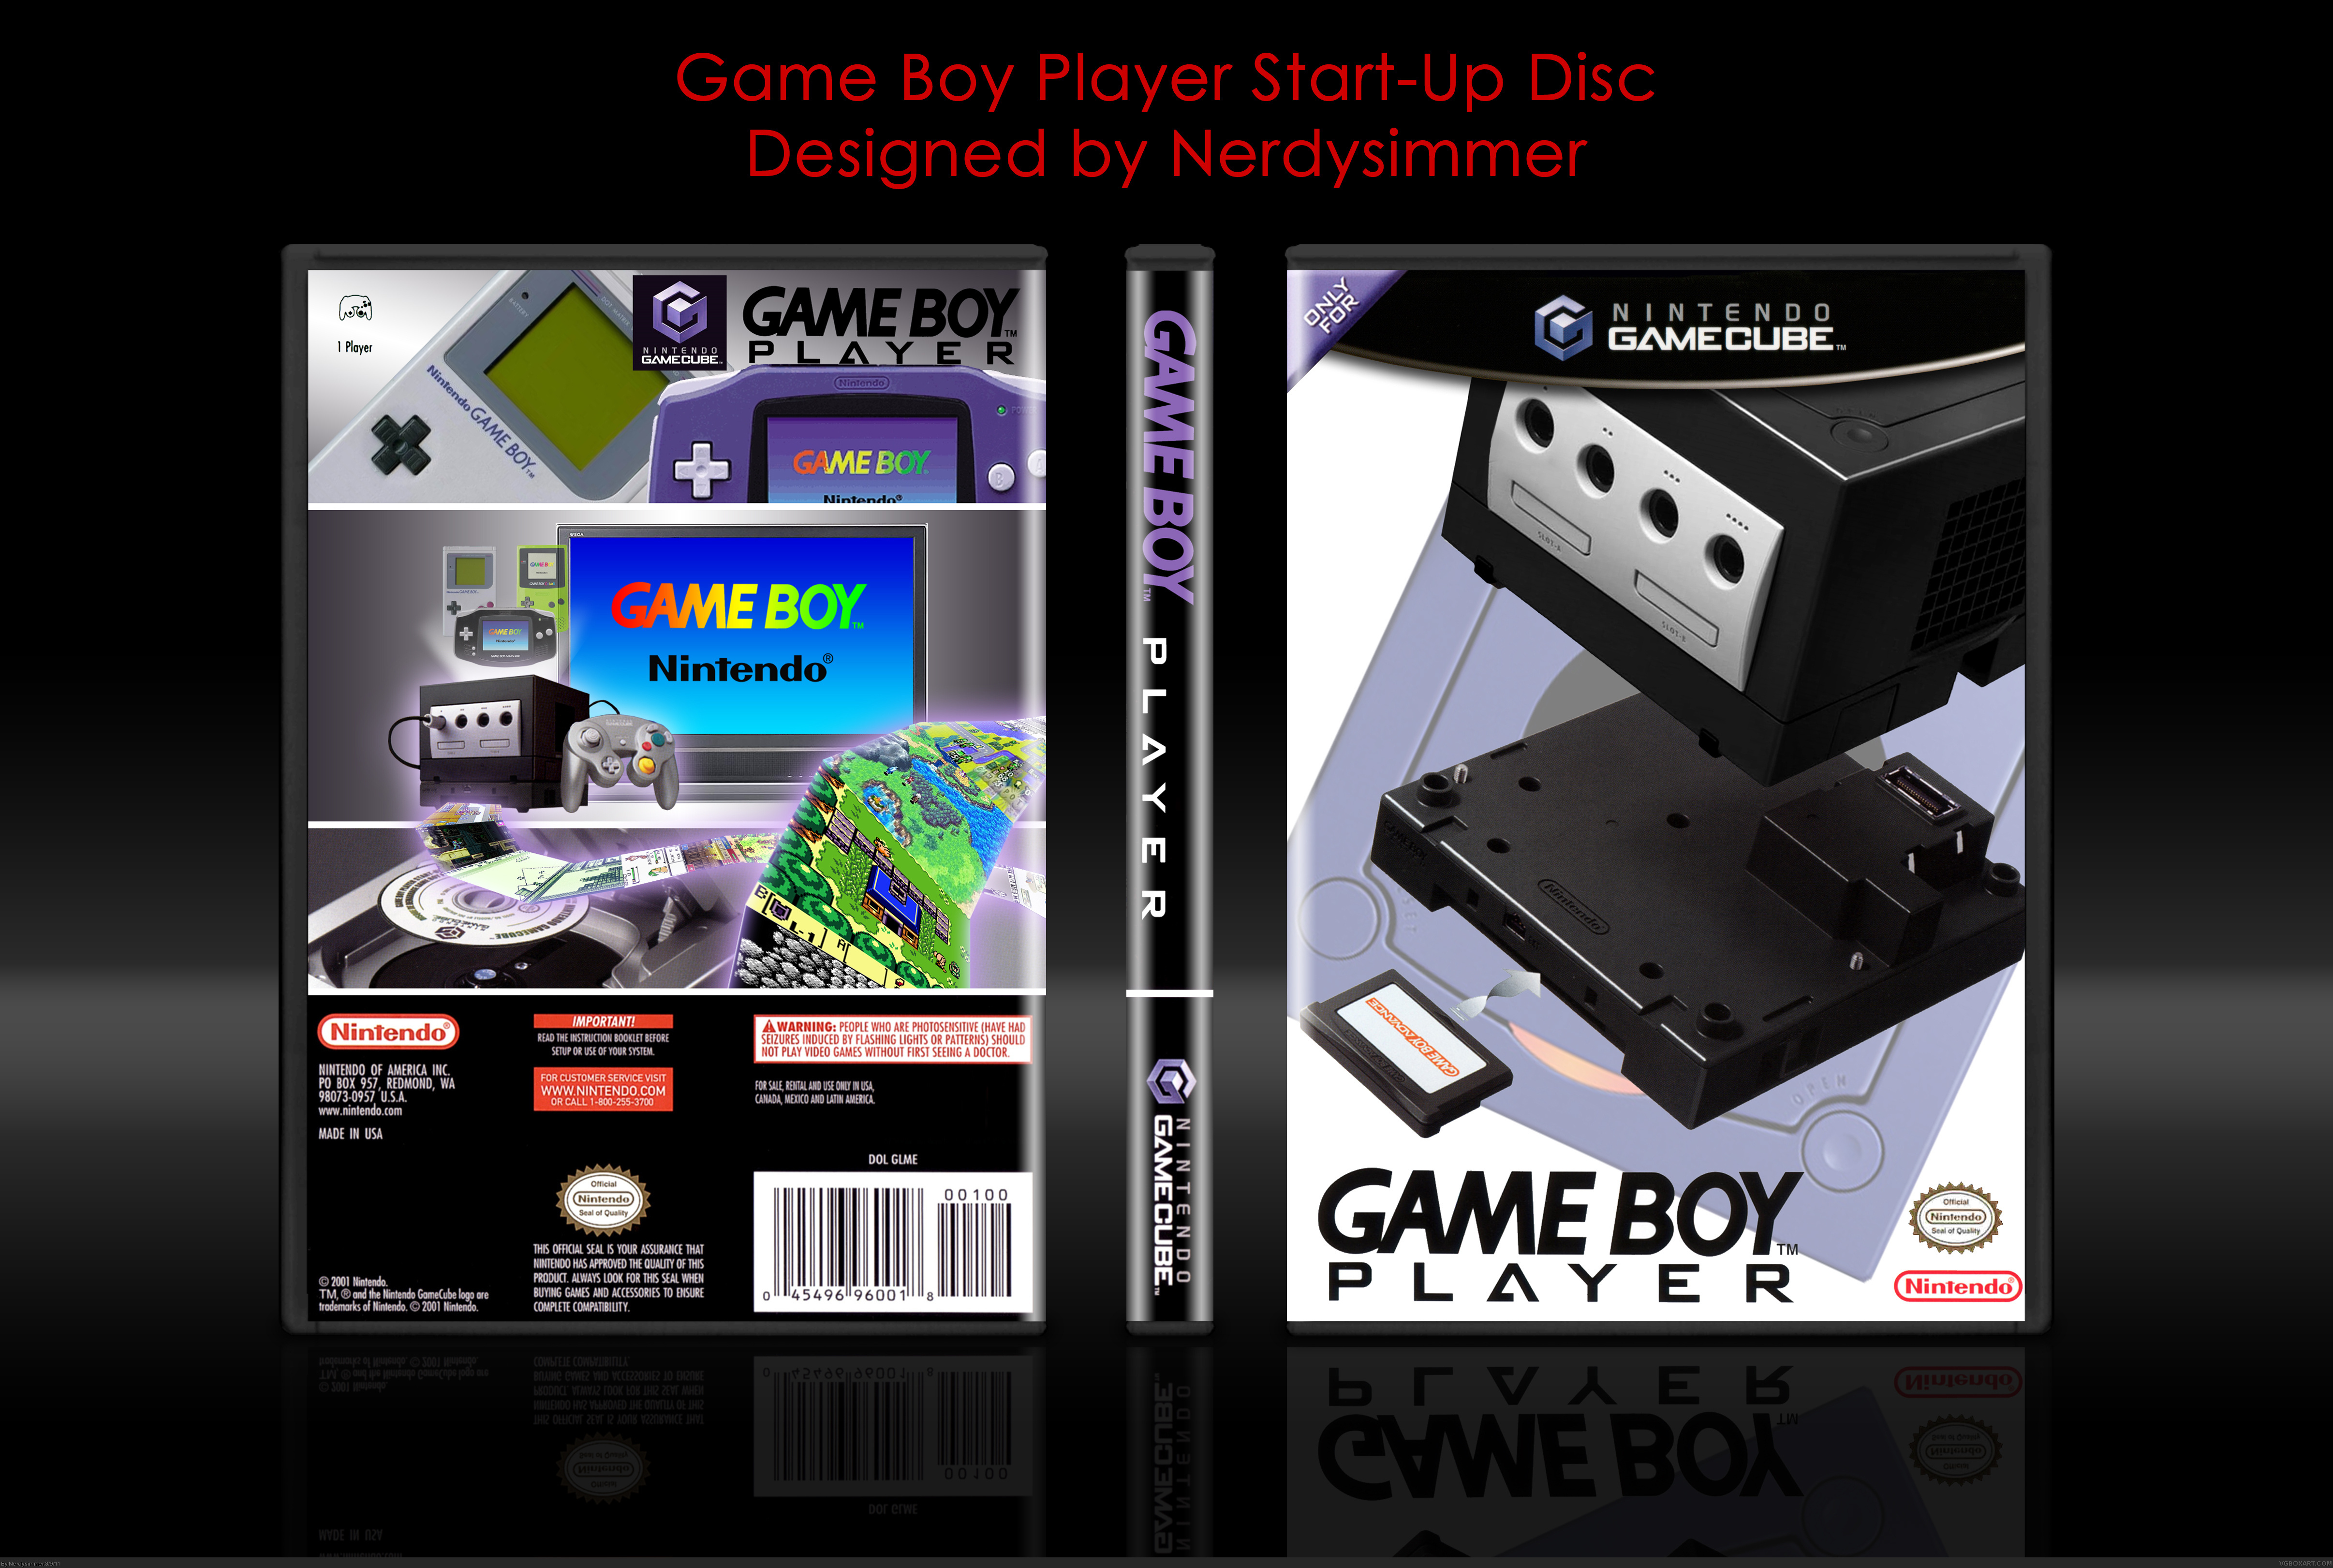 Game Boy Player Startup Disc box cover